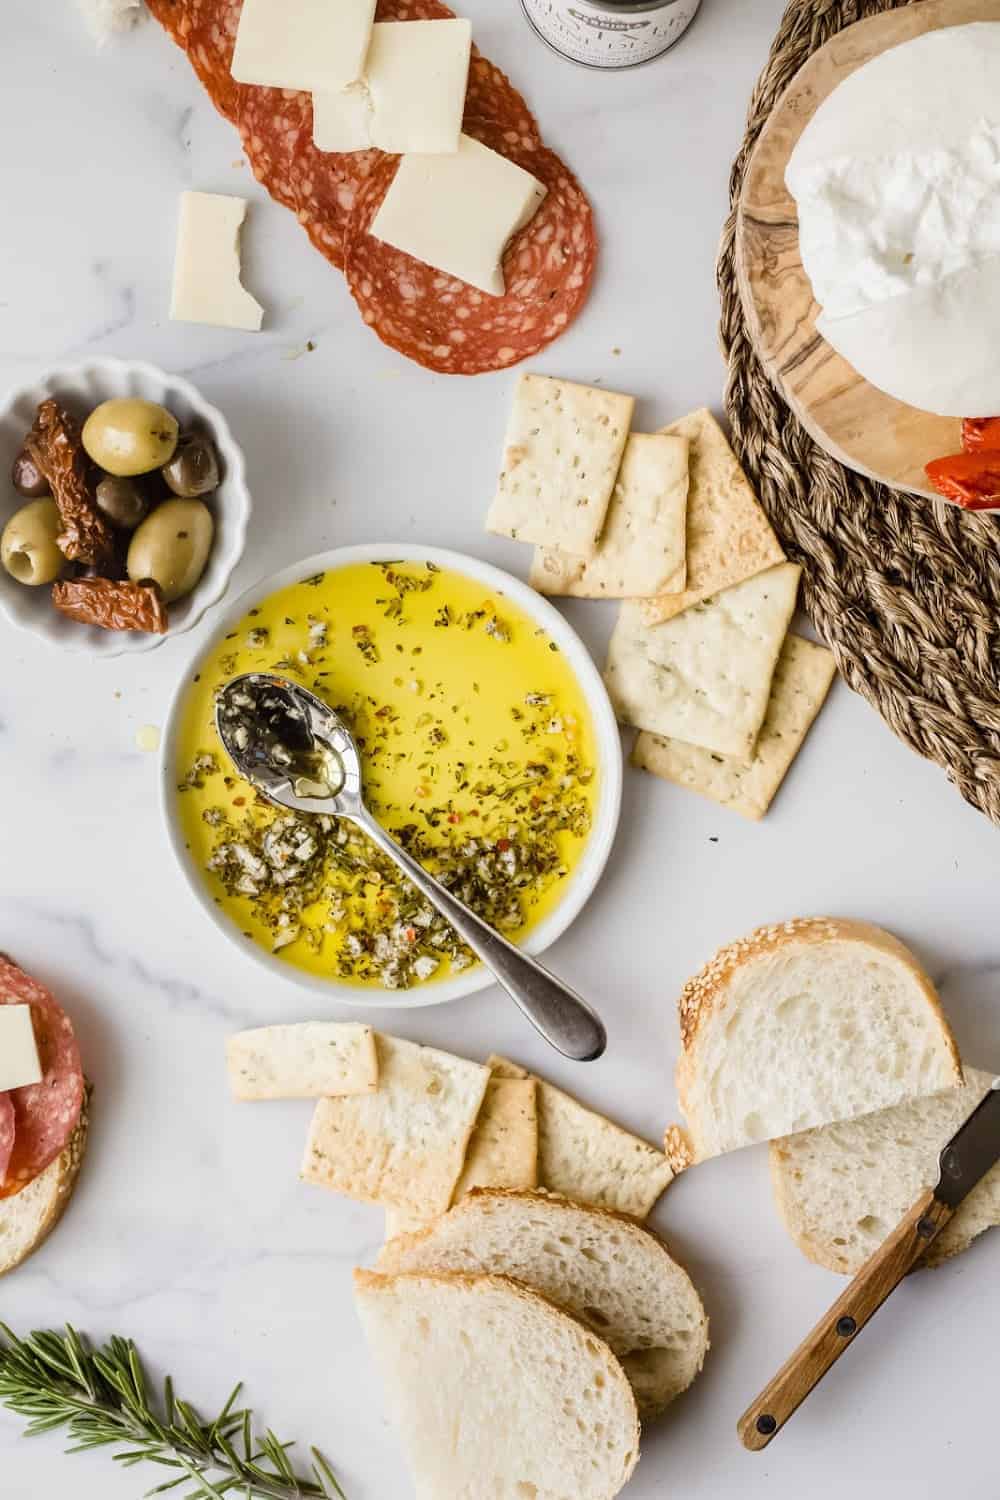 Spoon in a bowl of olive oil herb dip surrounded by bread, olives and charcuterie